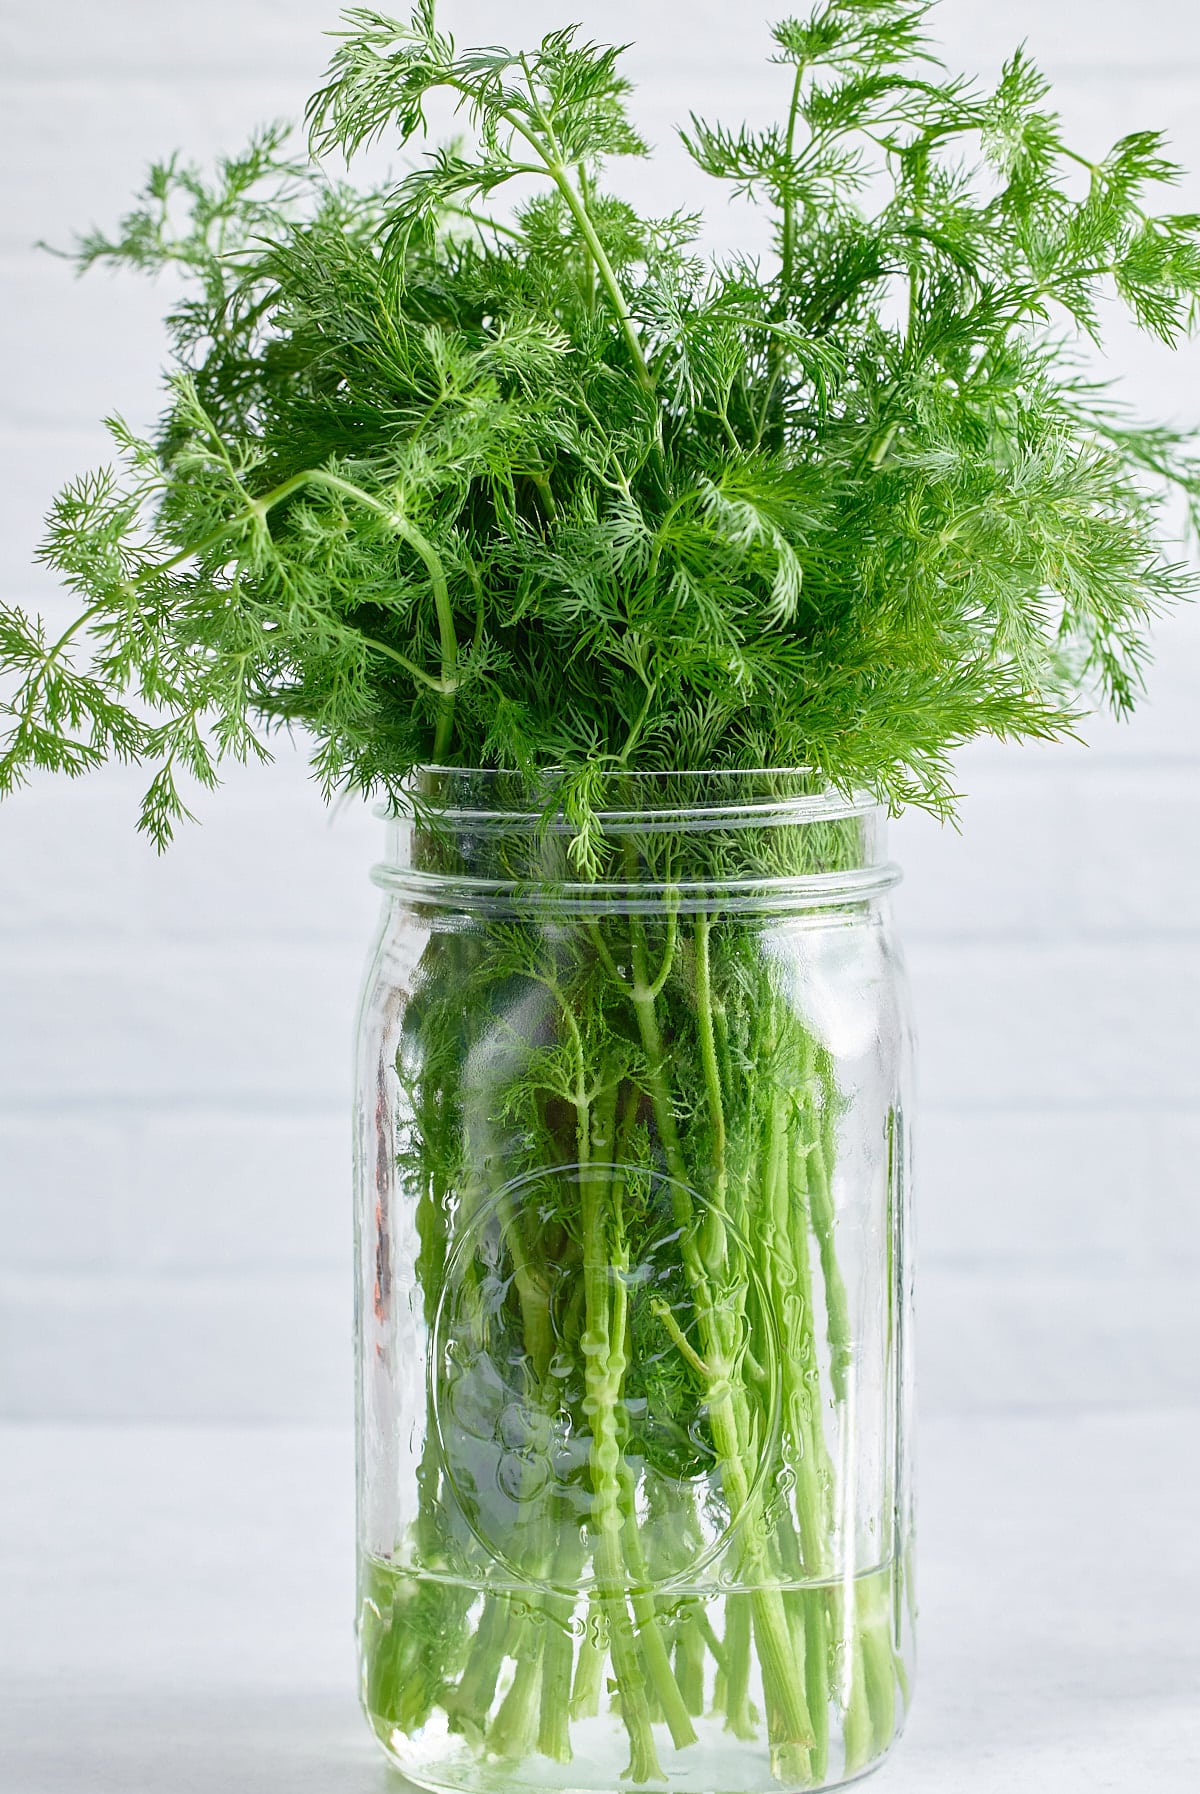 dill in a glass jar with a plastic bag over it